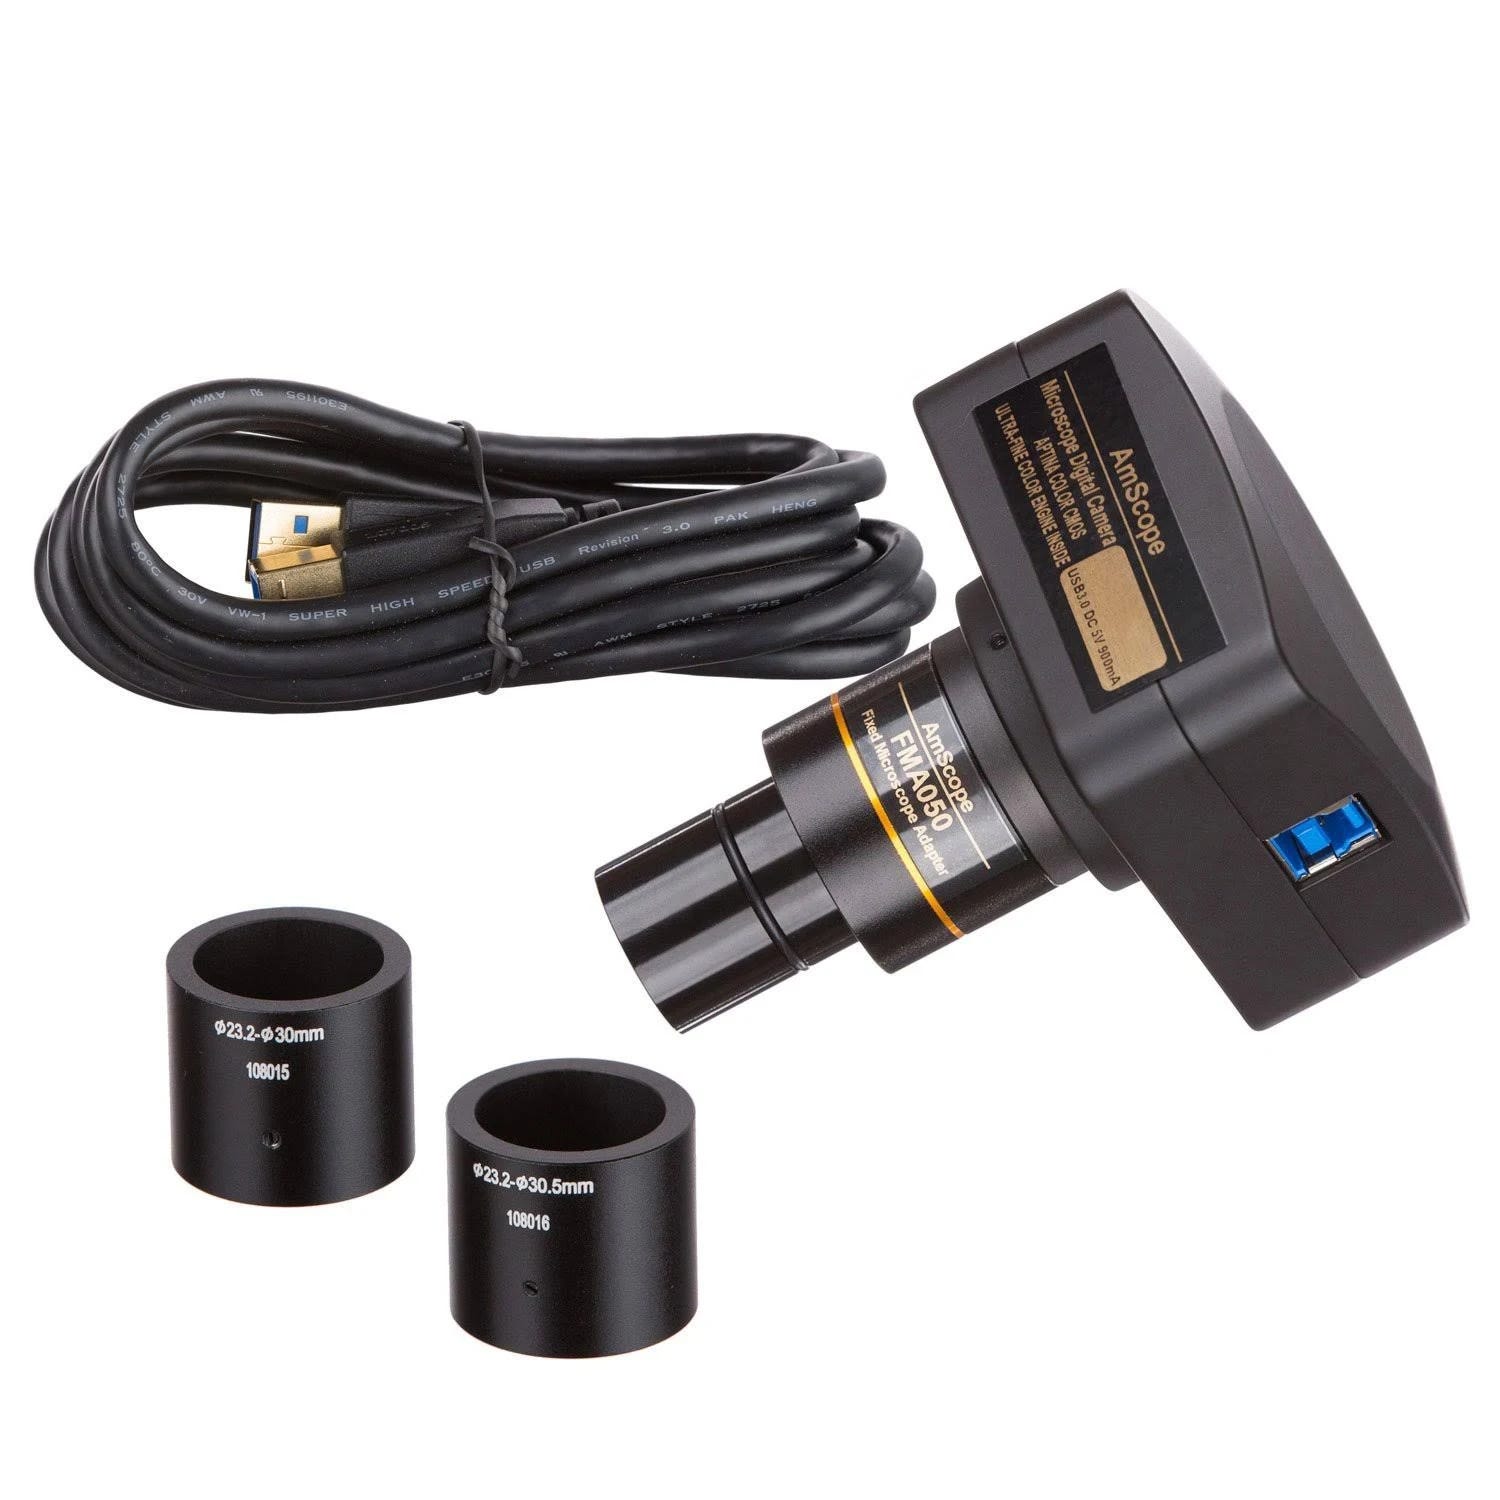 Stylish Modern 16MP USB 3.0 Real-Time Video Microscope with Advanced Software Features and Easy Setup | Image